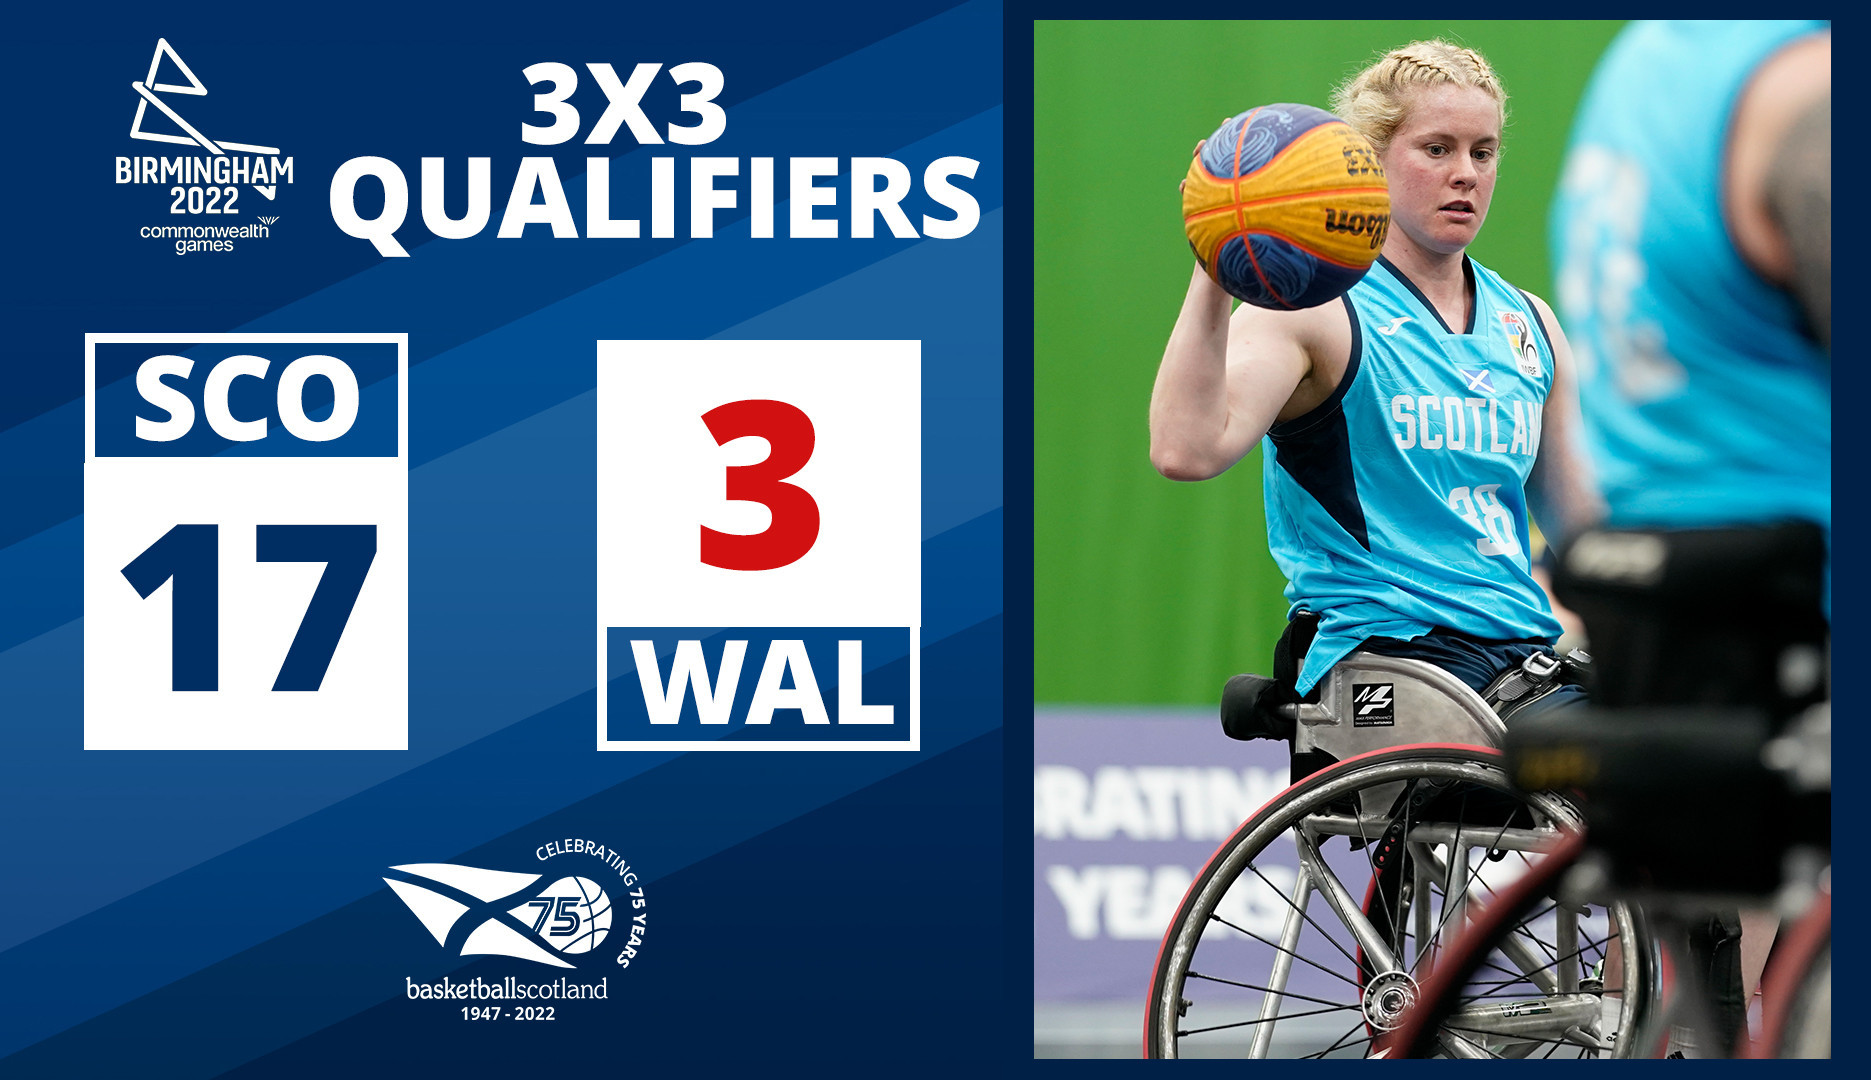 Scotland and Northern Ireland qualify for Birmingham 2022 Commonwealth Games in 3x3 wheelchair basketball